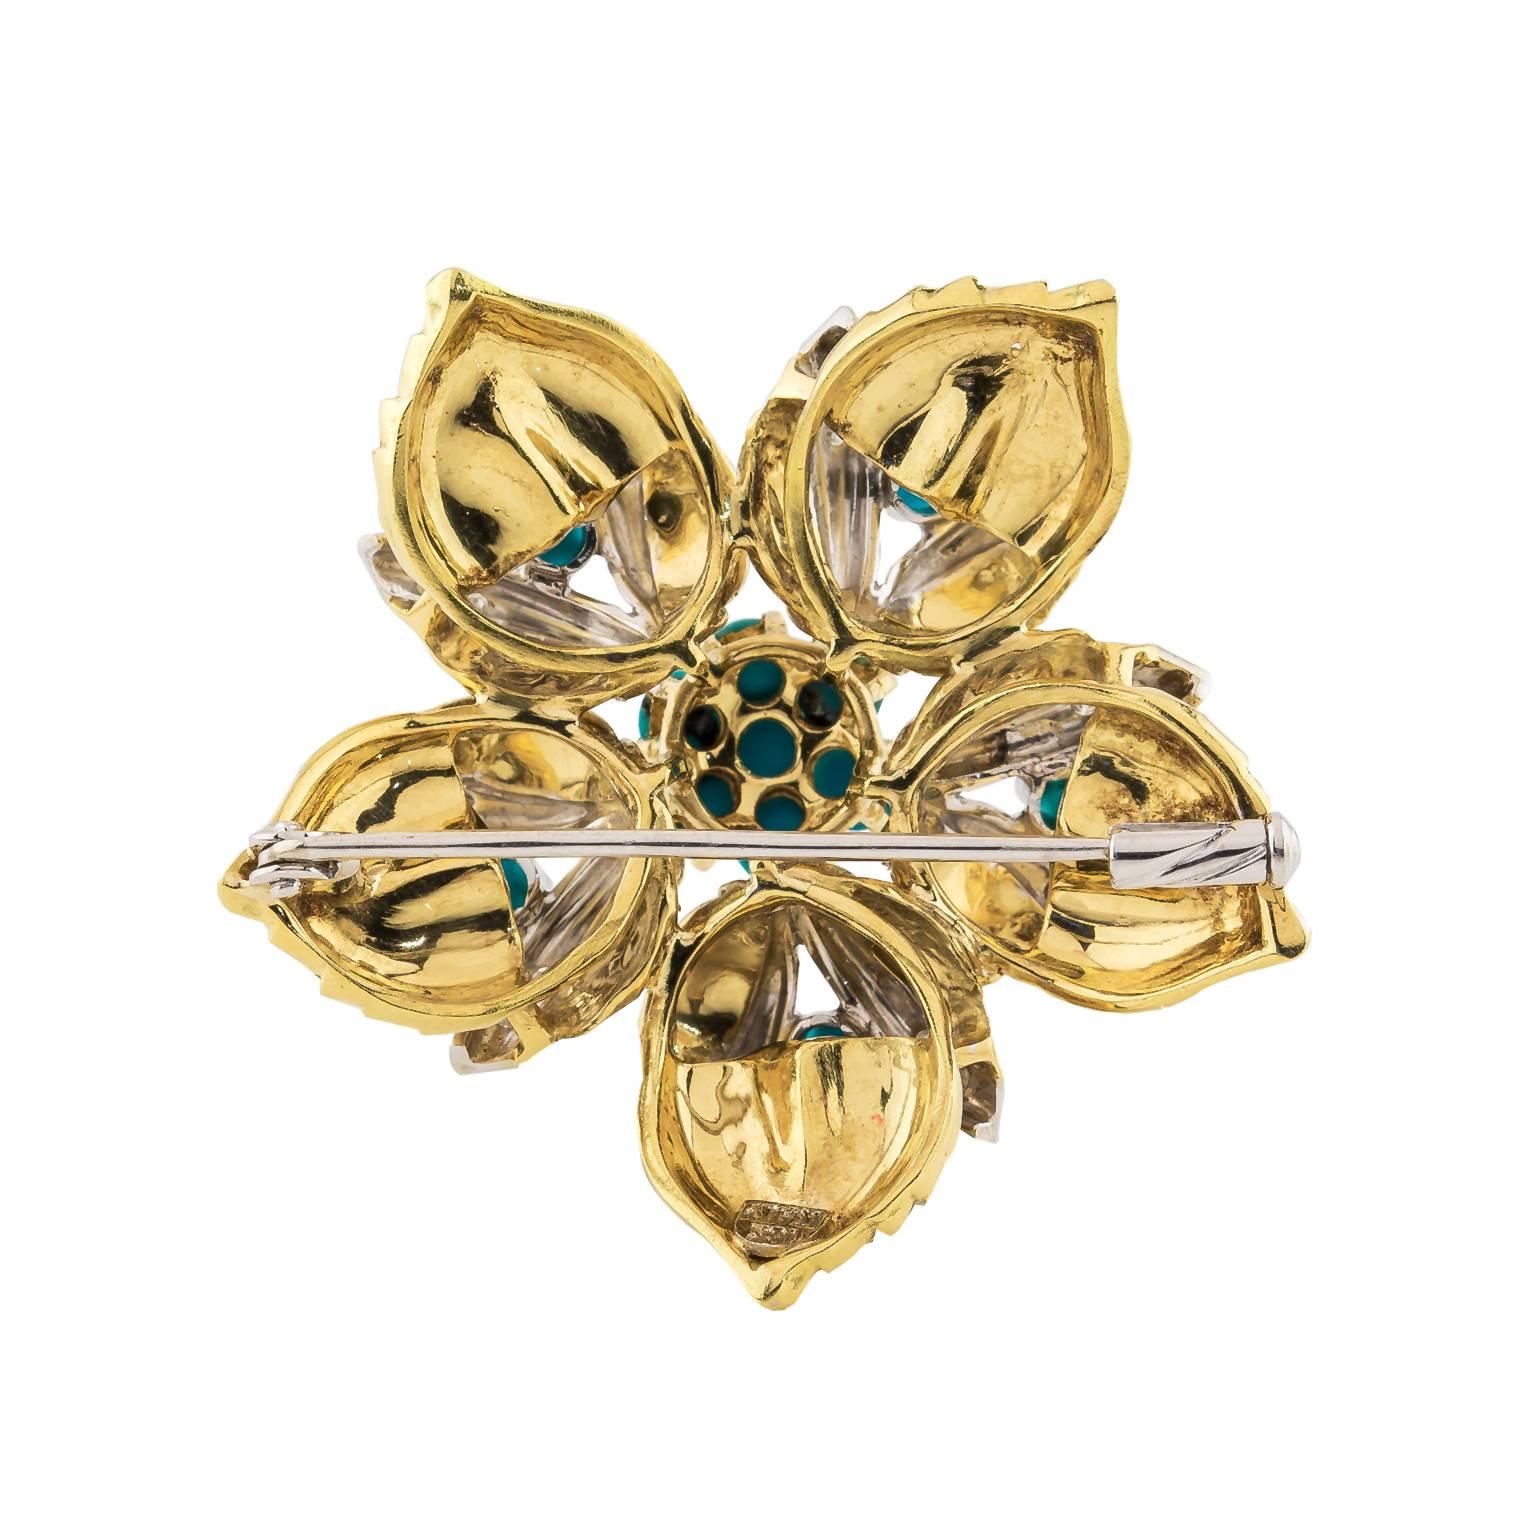 This lovely Mid-Century 18k yellow and white gold brooch features 12 turquoise cabochons and 0.06 cttw single cut diamonds set into a five petal flower motif. 
1.5 in dia. (3.81cm)
Marked Italy